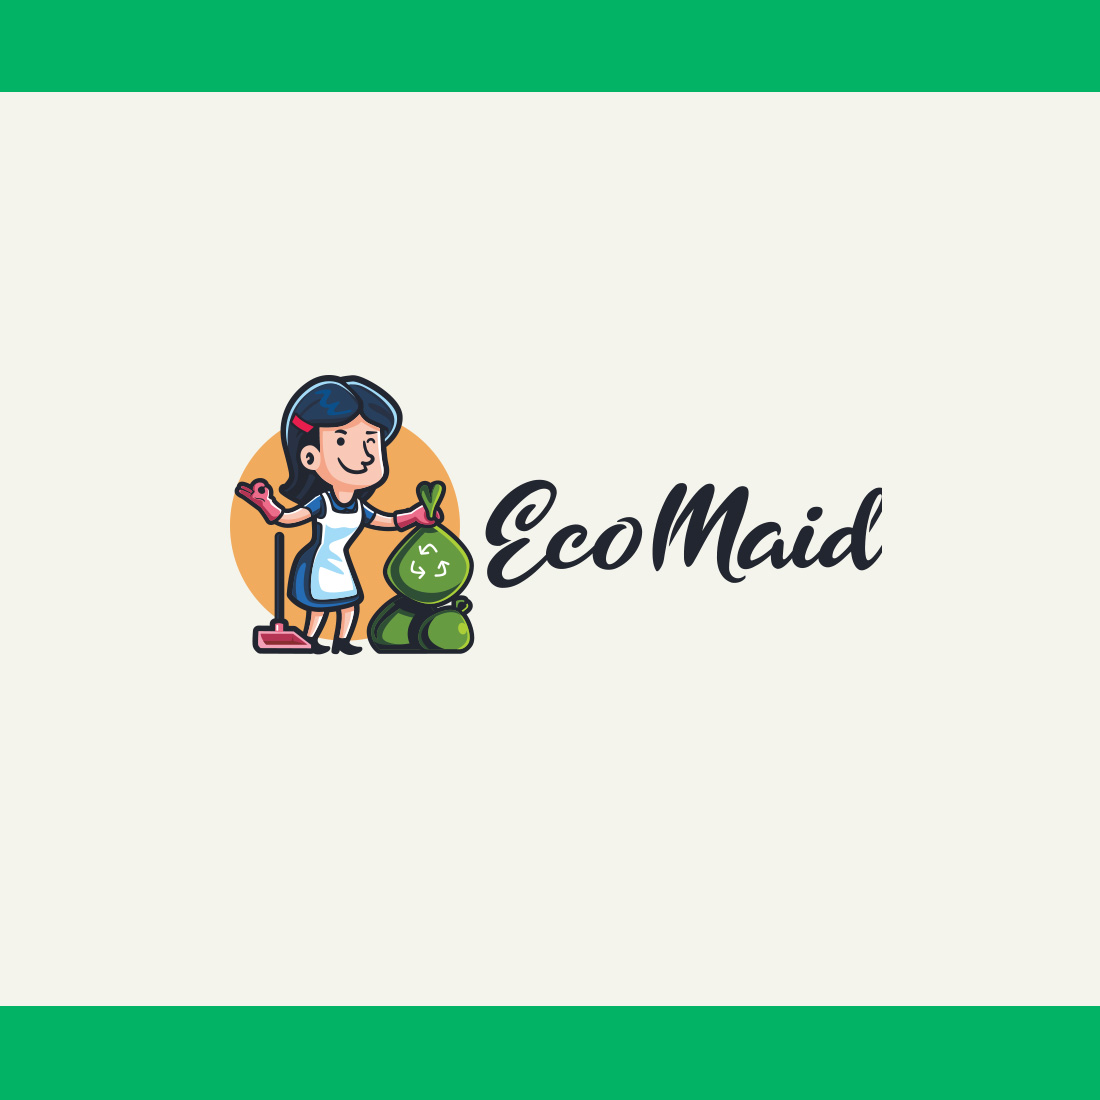 Eco Maid Character Logo Design cover image.